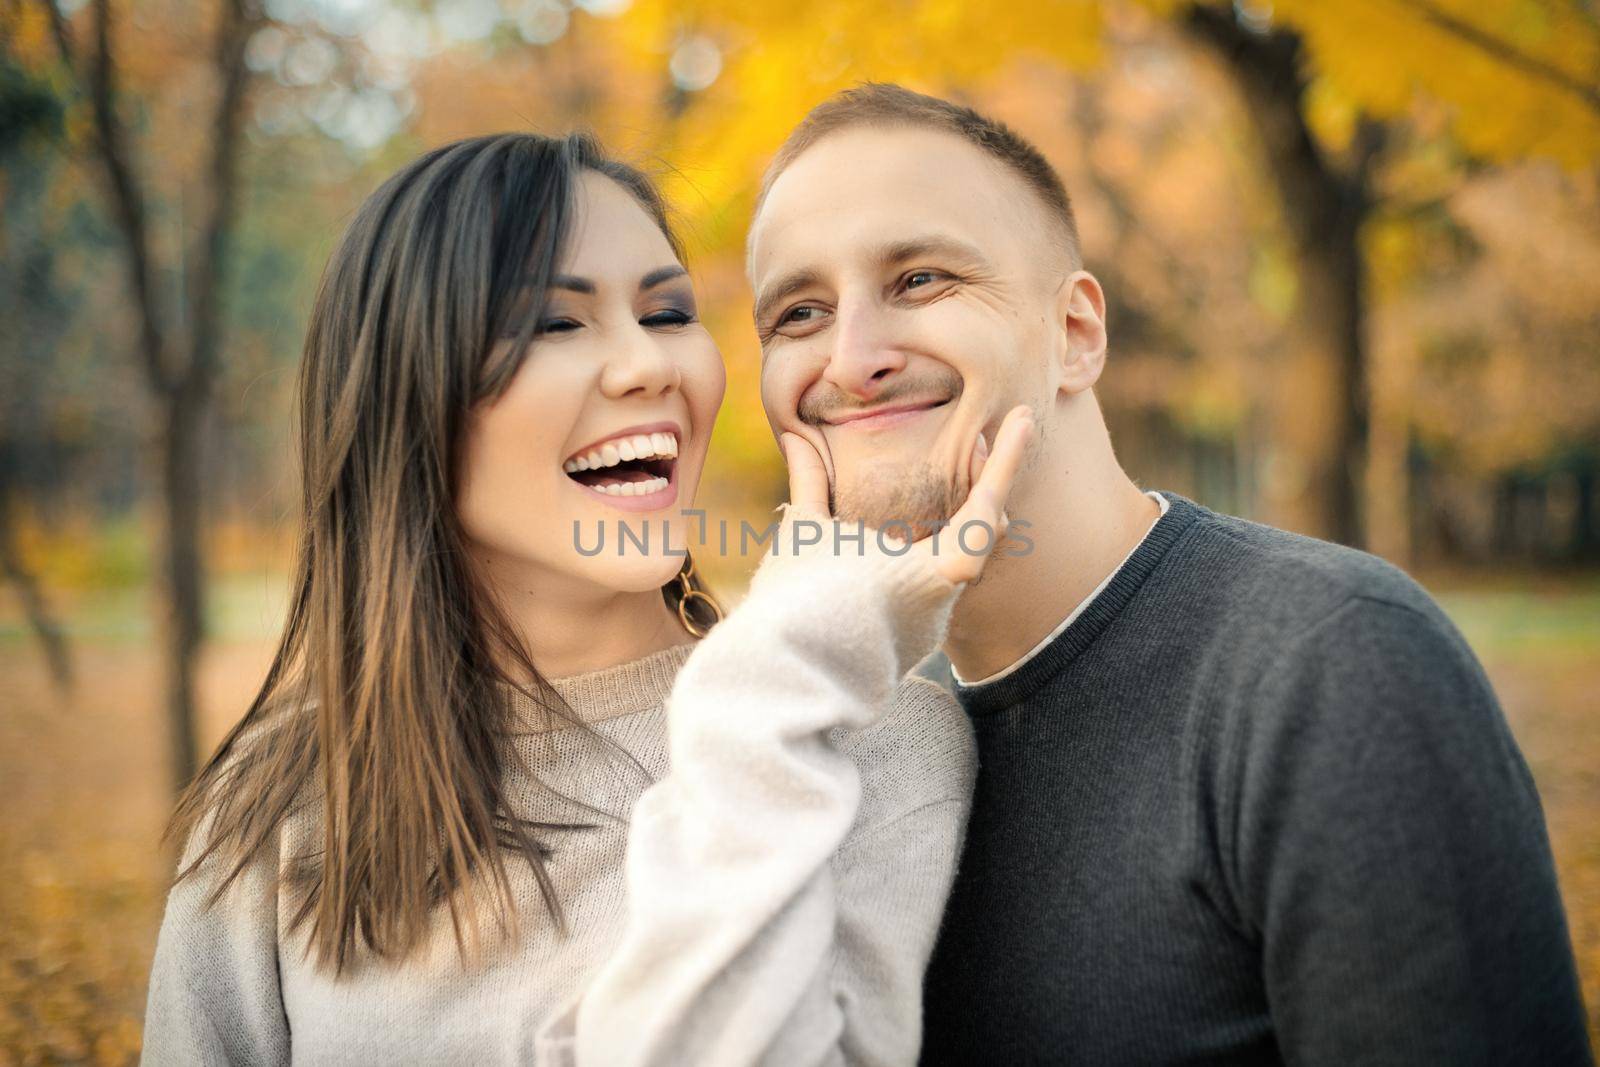 Outdoor portrait of interethnic couple in autumn park having fun together.